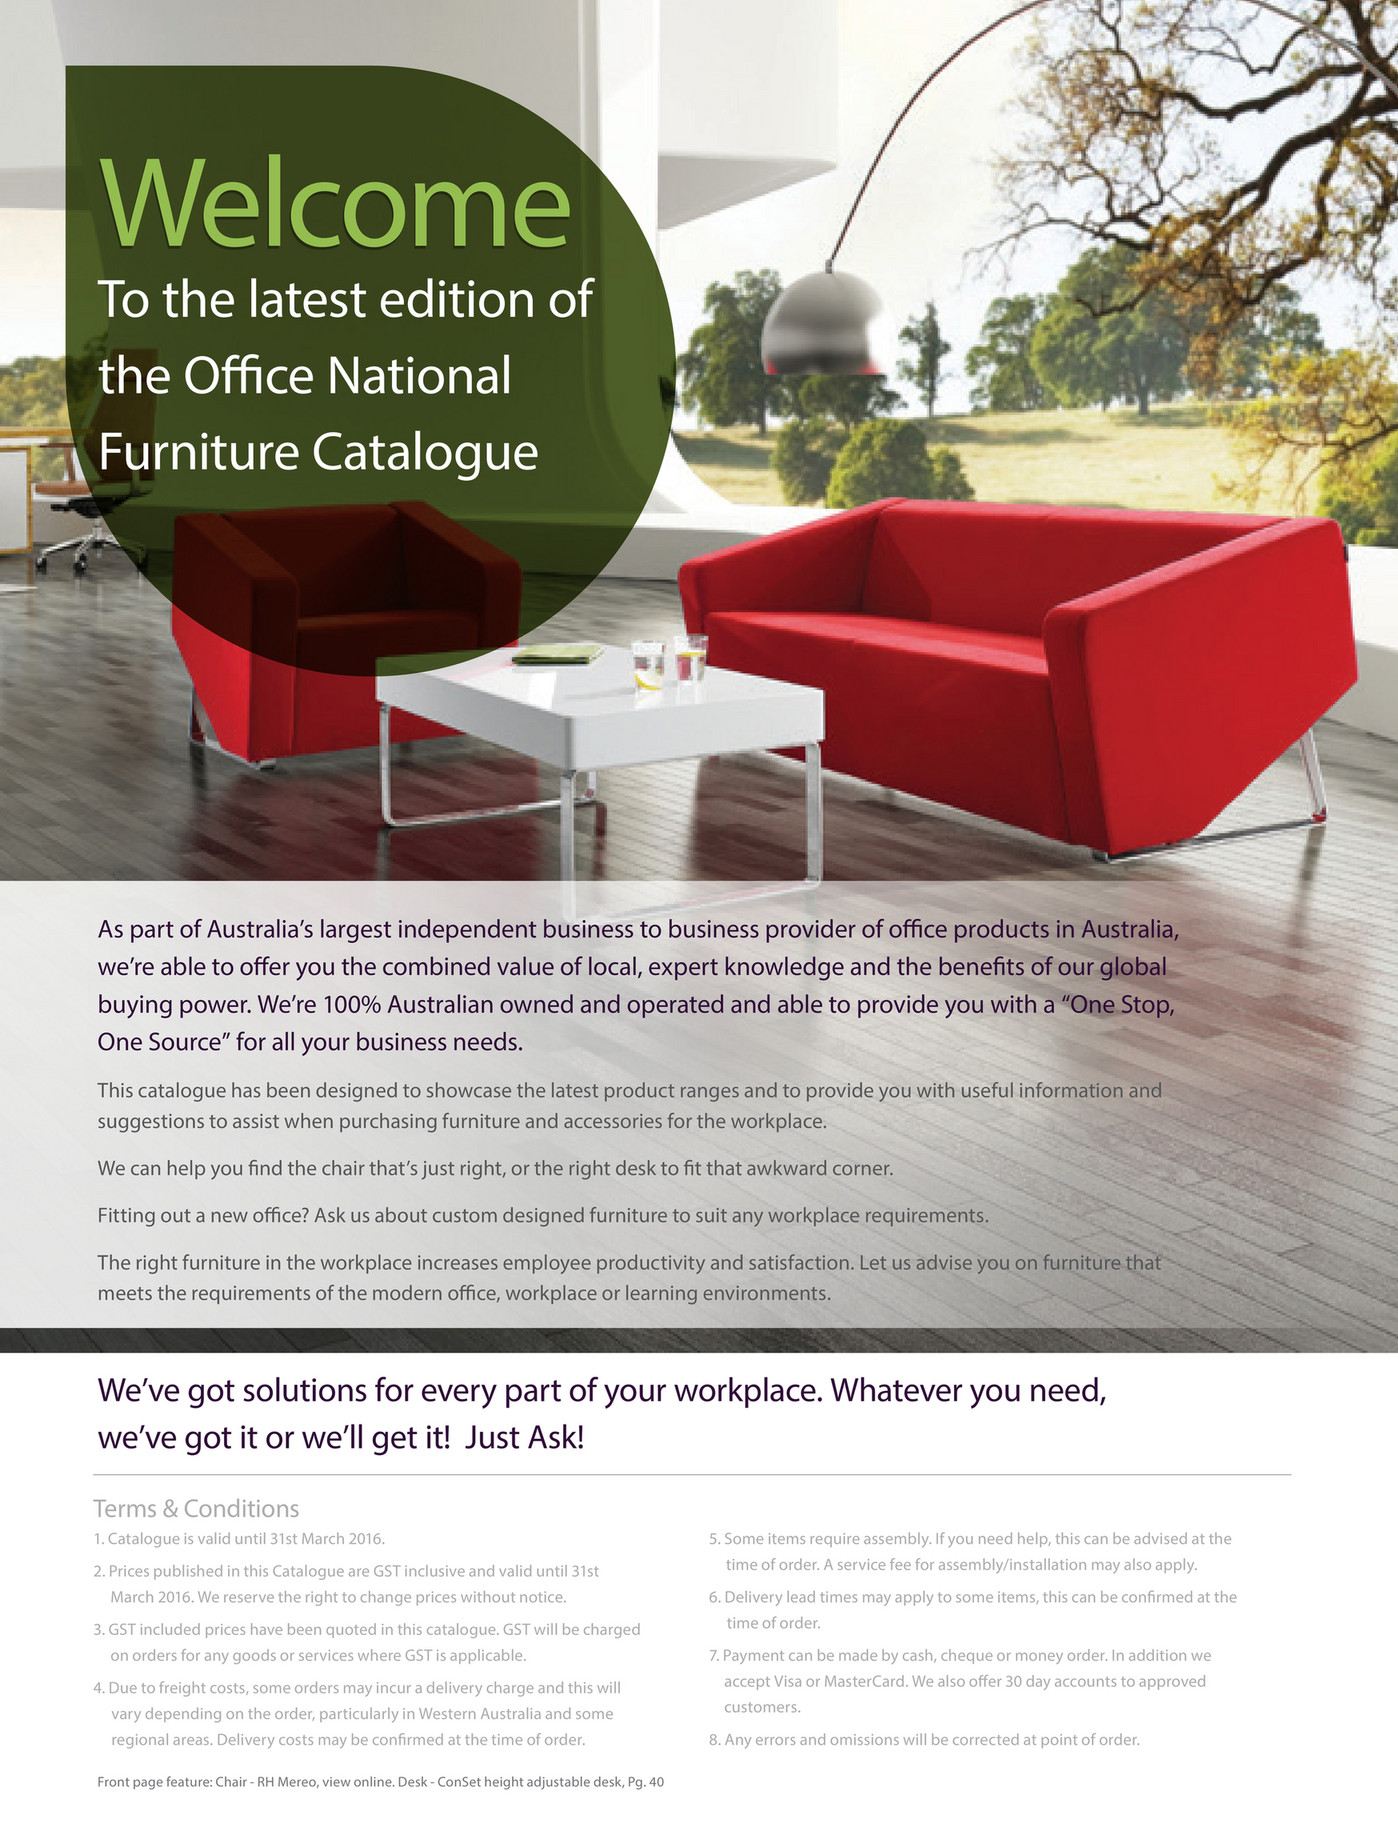 Micon National Furniture Catalogue F13 On Page 1 Created